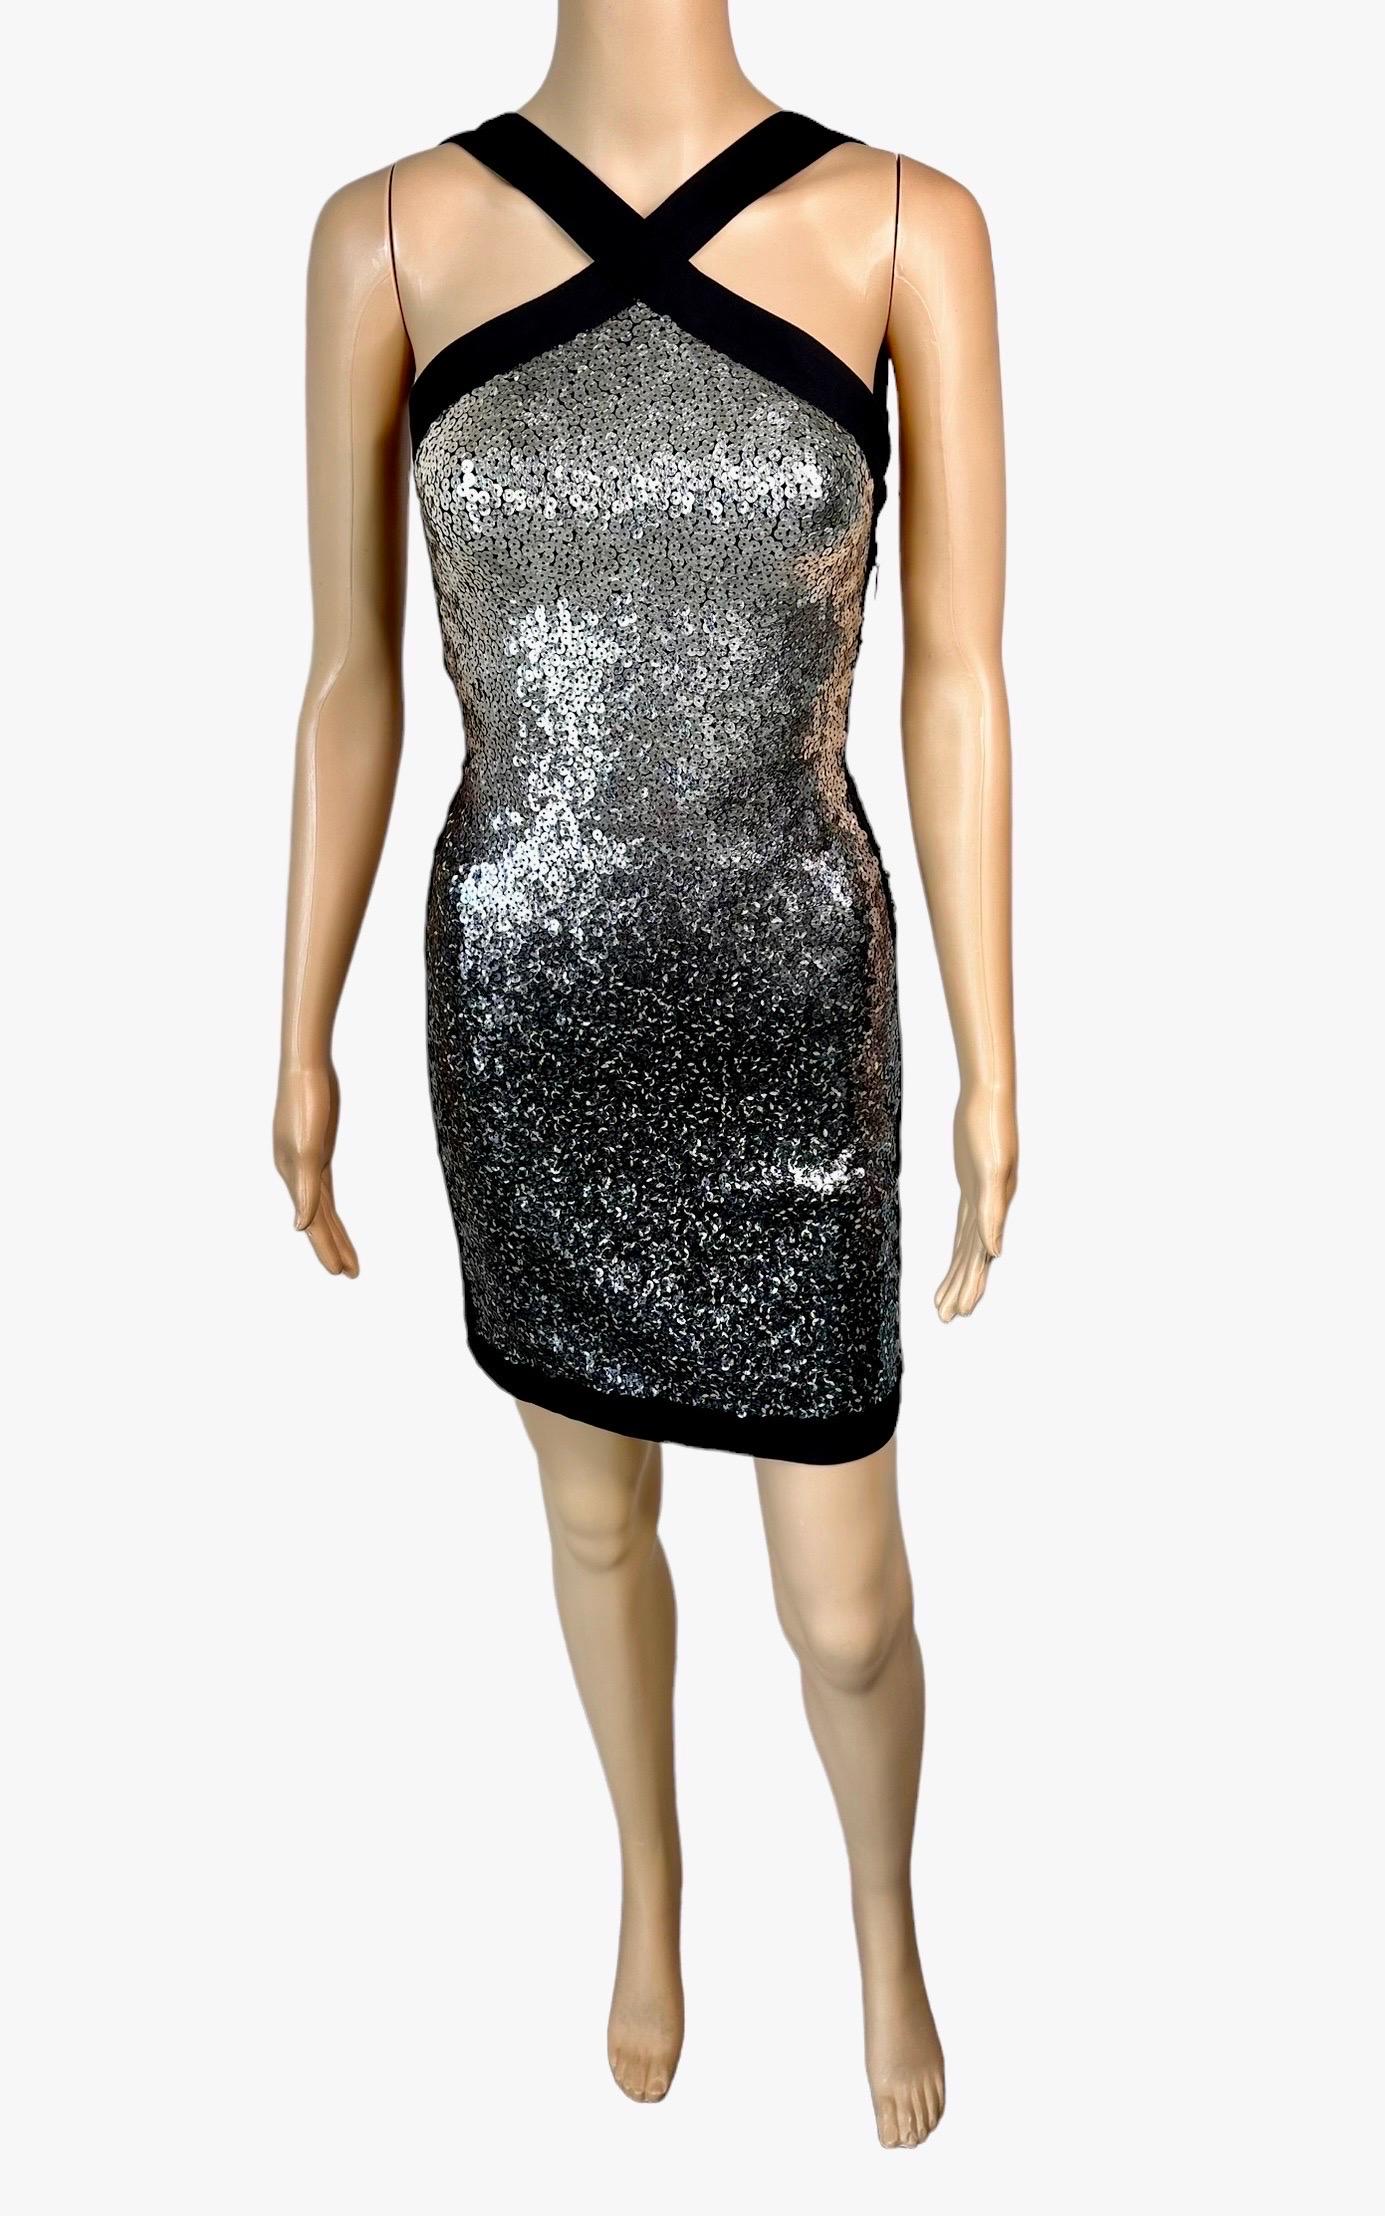 Roberto Cavalli S/S 2008 Runway Sequin Embellished Ombre Backless Mini Dress For Sale 5